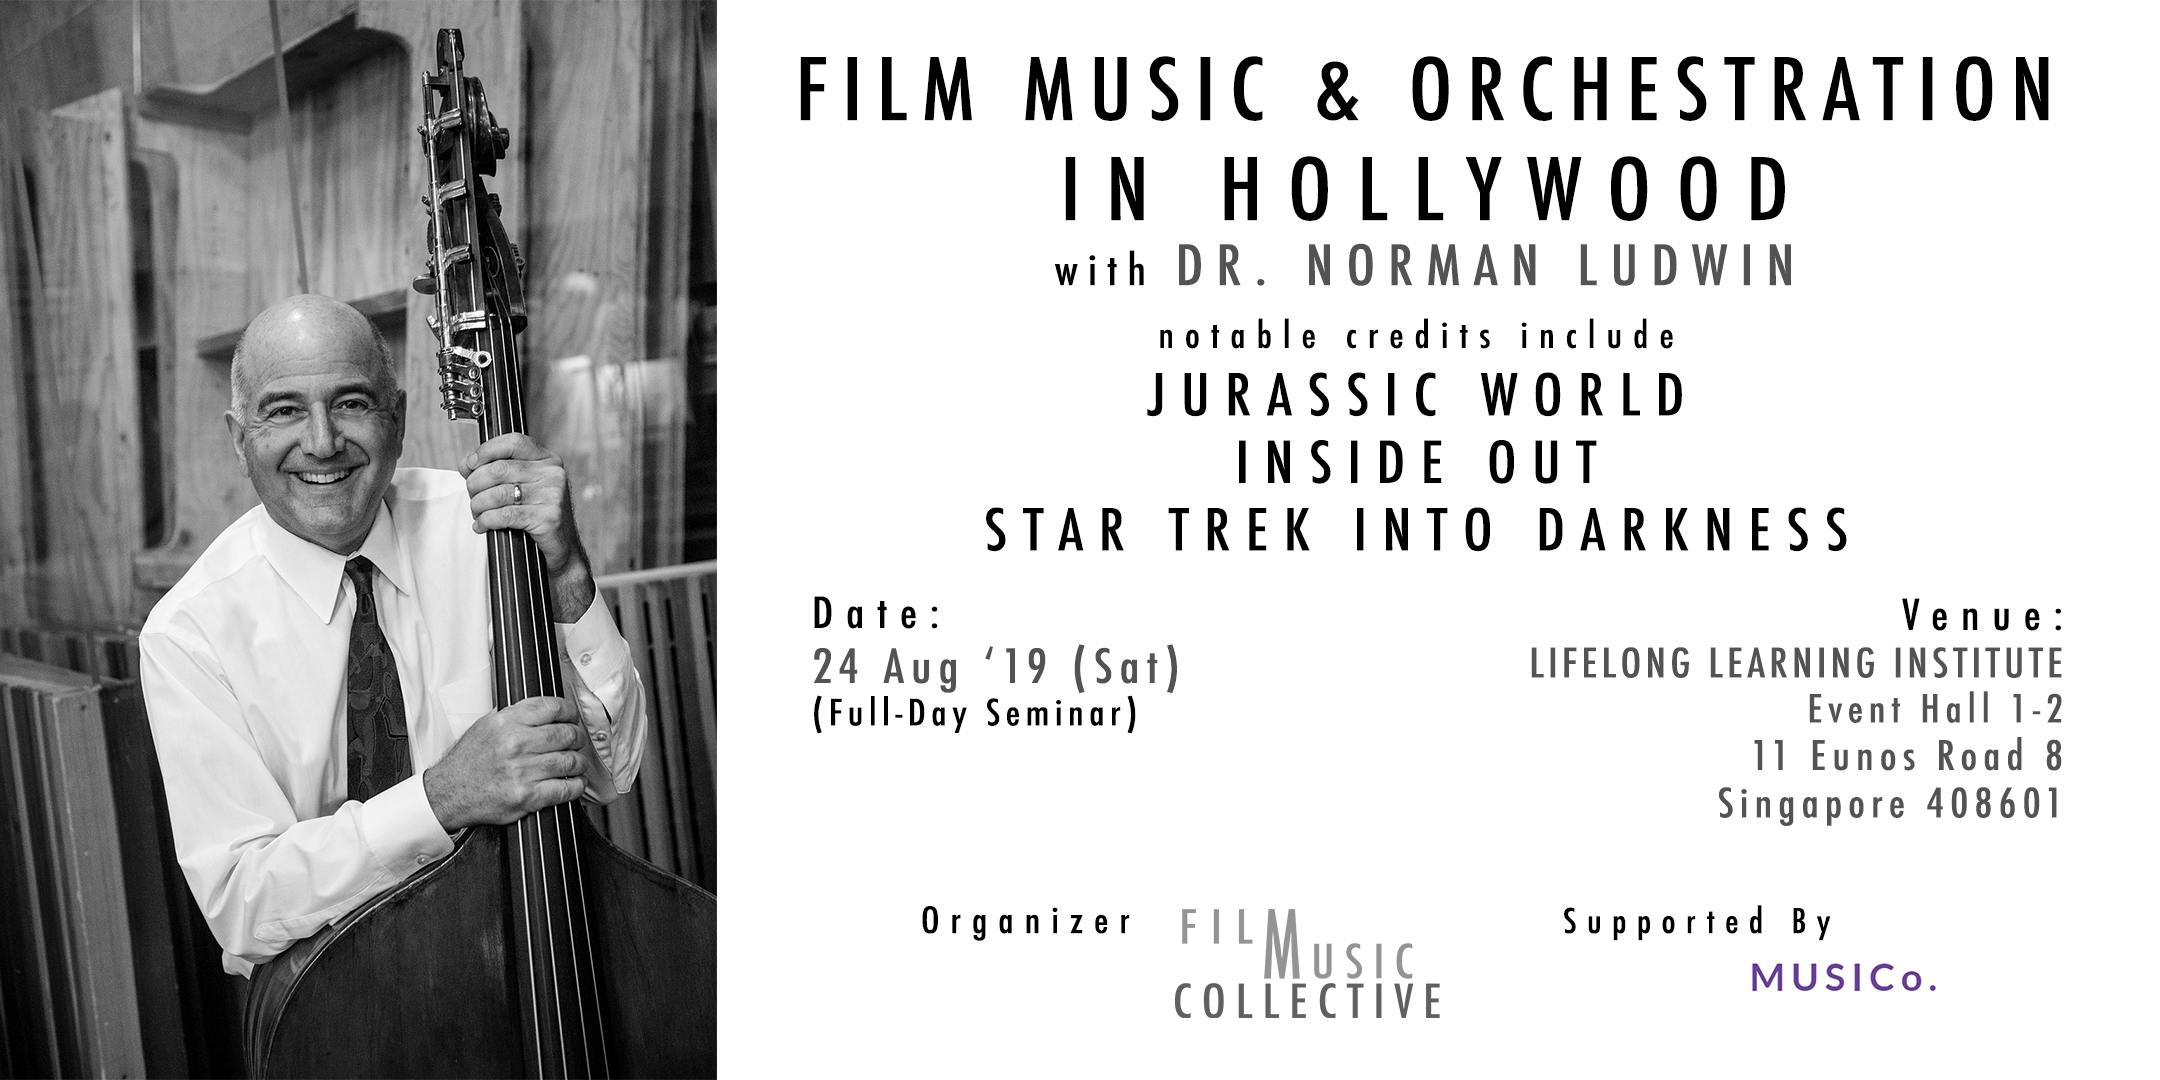 Film Music & Orchestration in Hollywood with Dr. Norman Ludwin [Singapore]